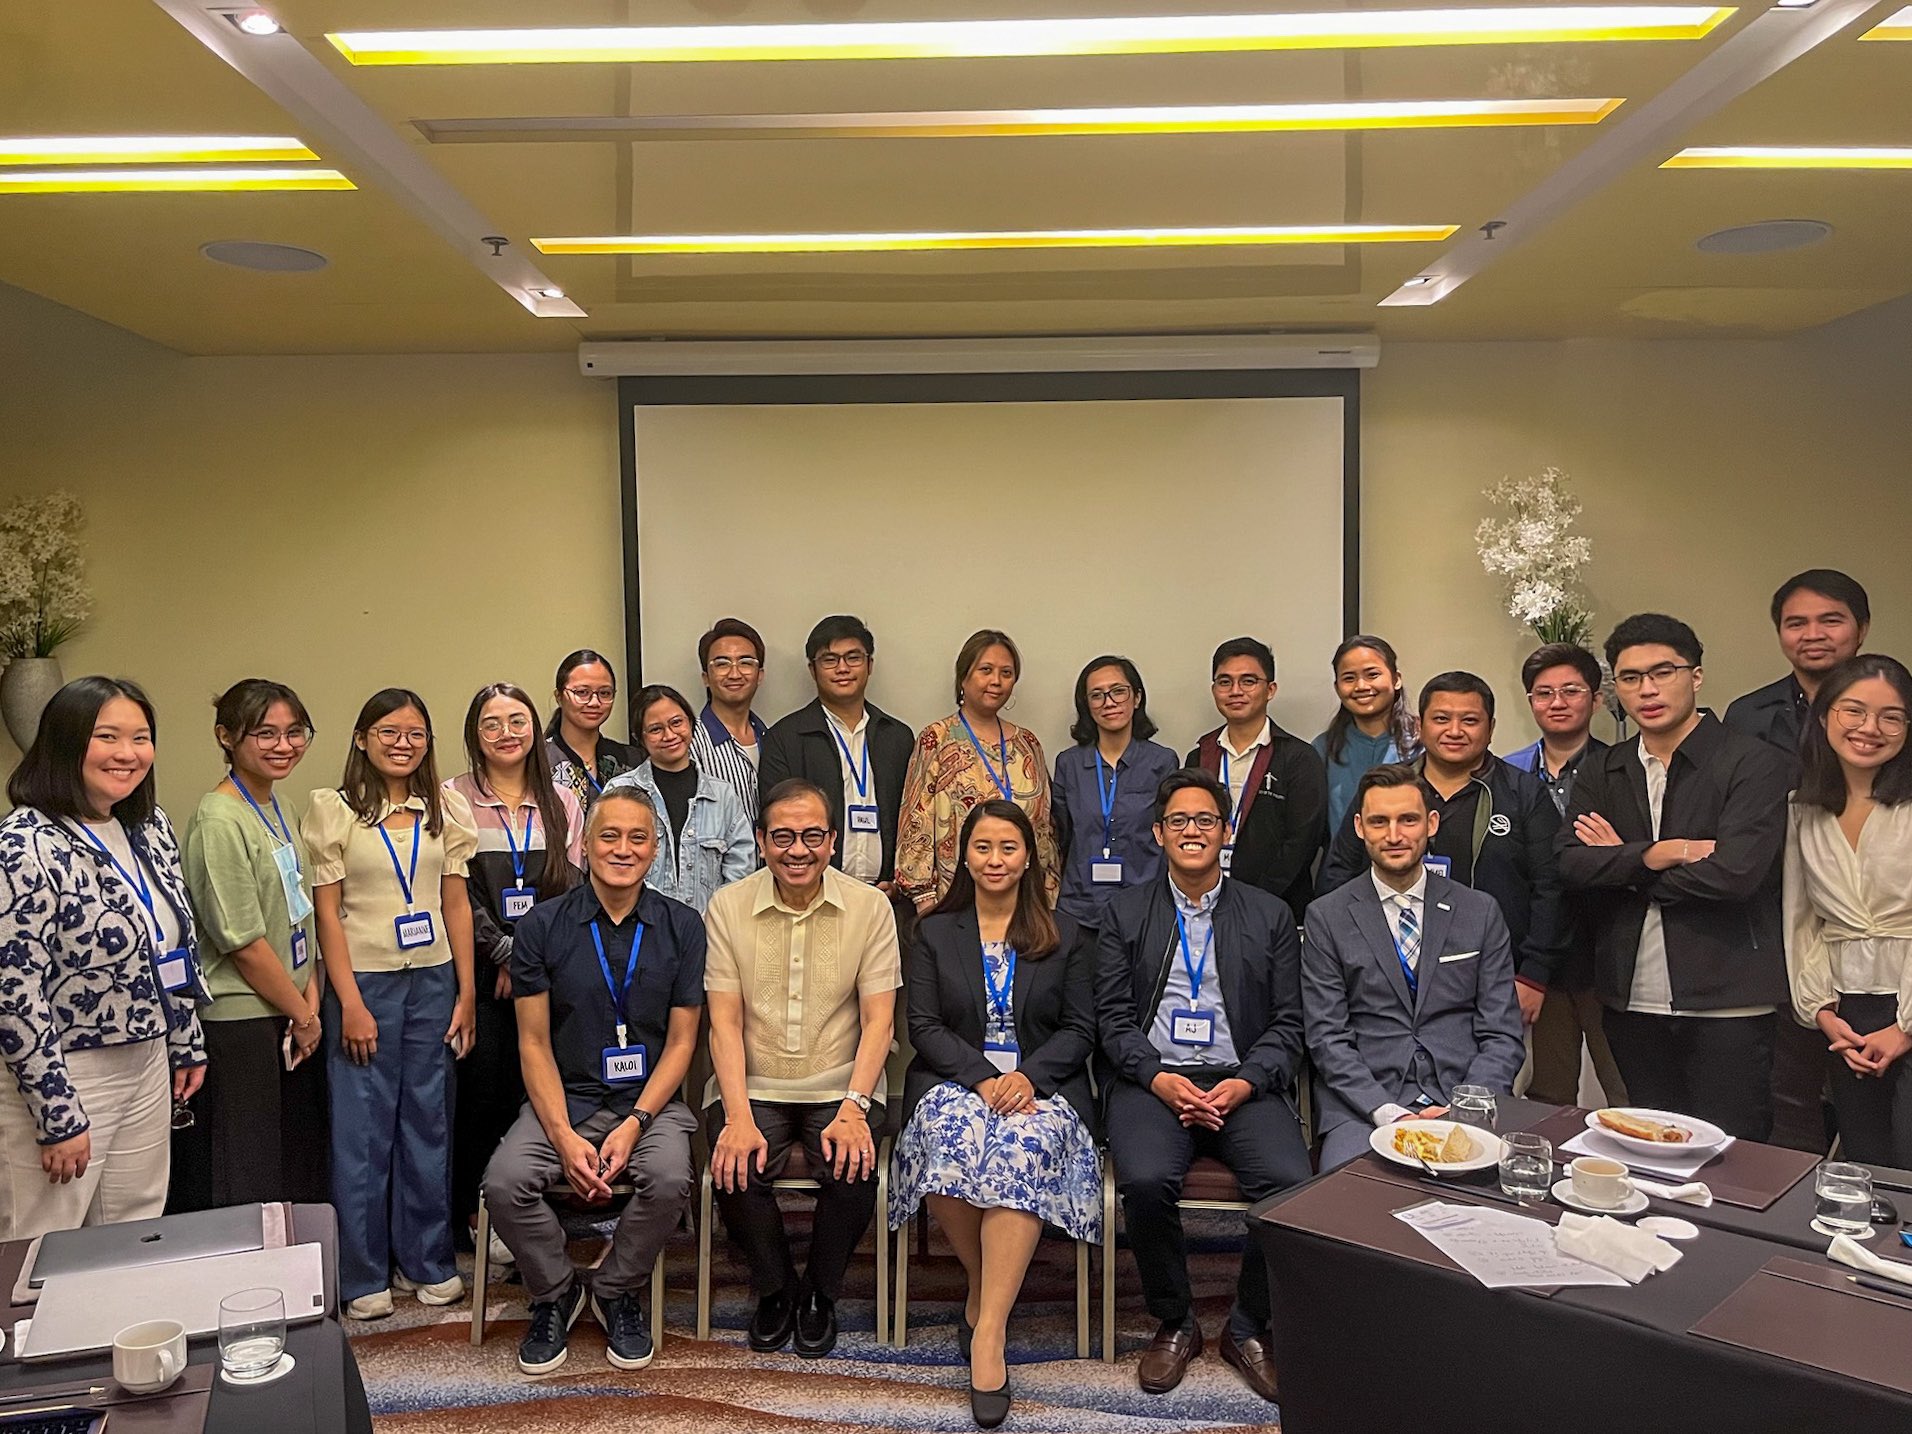 Representatives from Various Organizations and the Sin Tax Coalition in the ‘Advocacy and Strategic Communications Planning Workshop for Alcohol